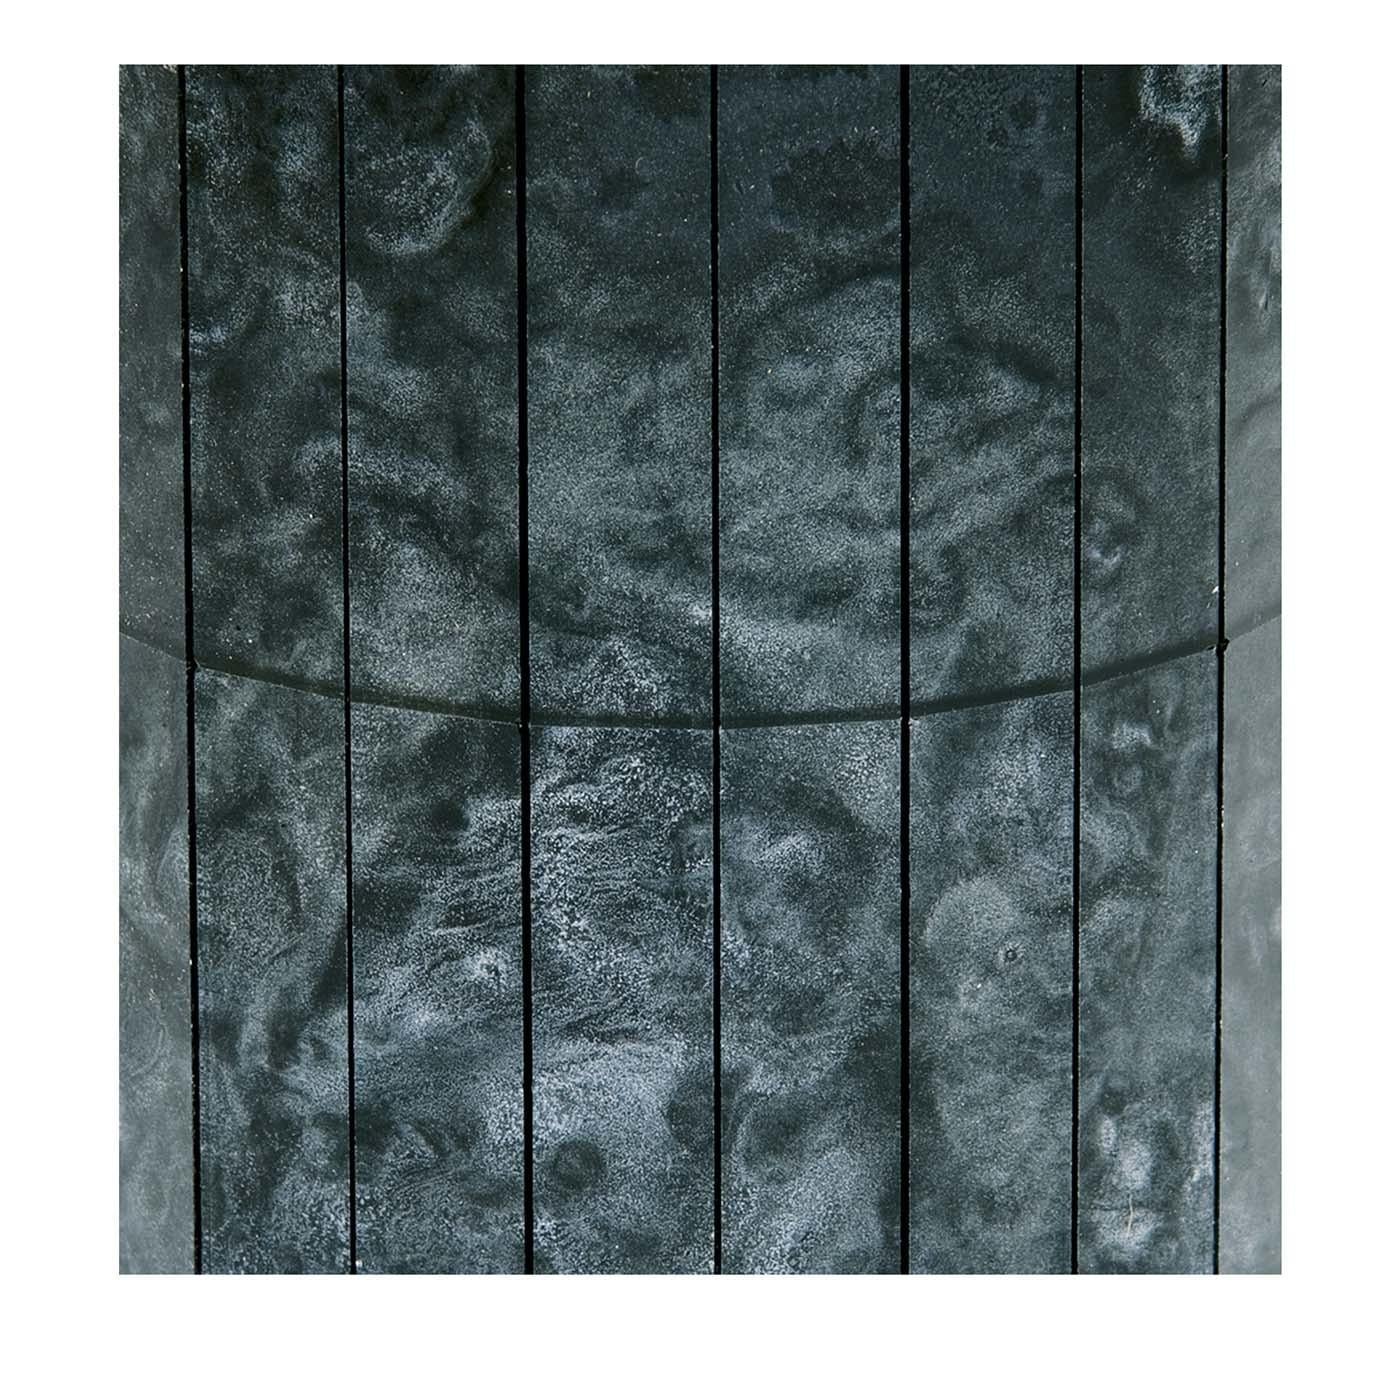 The dark and smokey gray swirls of these canvased mosaic glass panele have an almost hypnotic effect. Using ancient inspiration for a very modern object, this decorative modular panel is a perfectly moody and profound addition to any modern home.